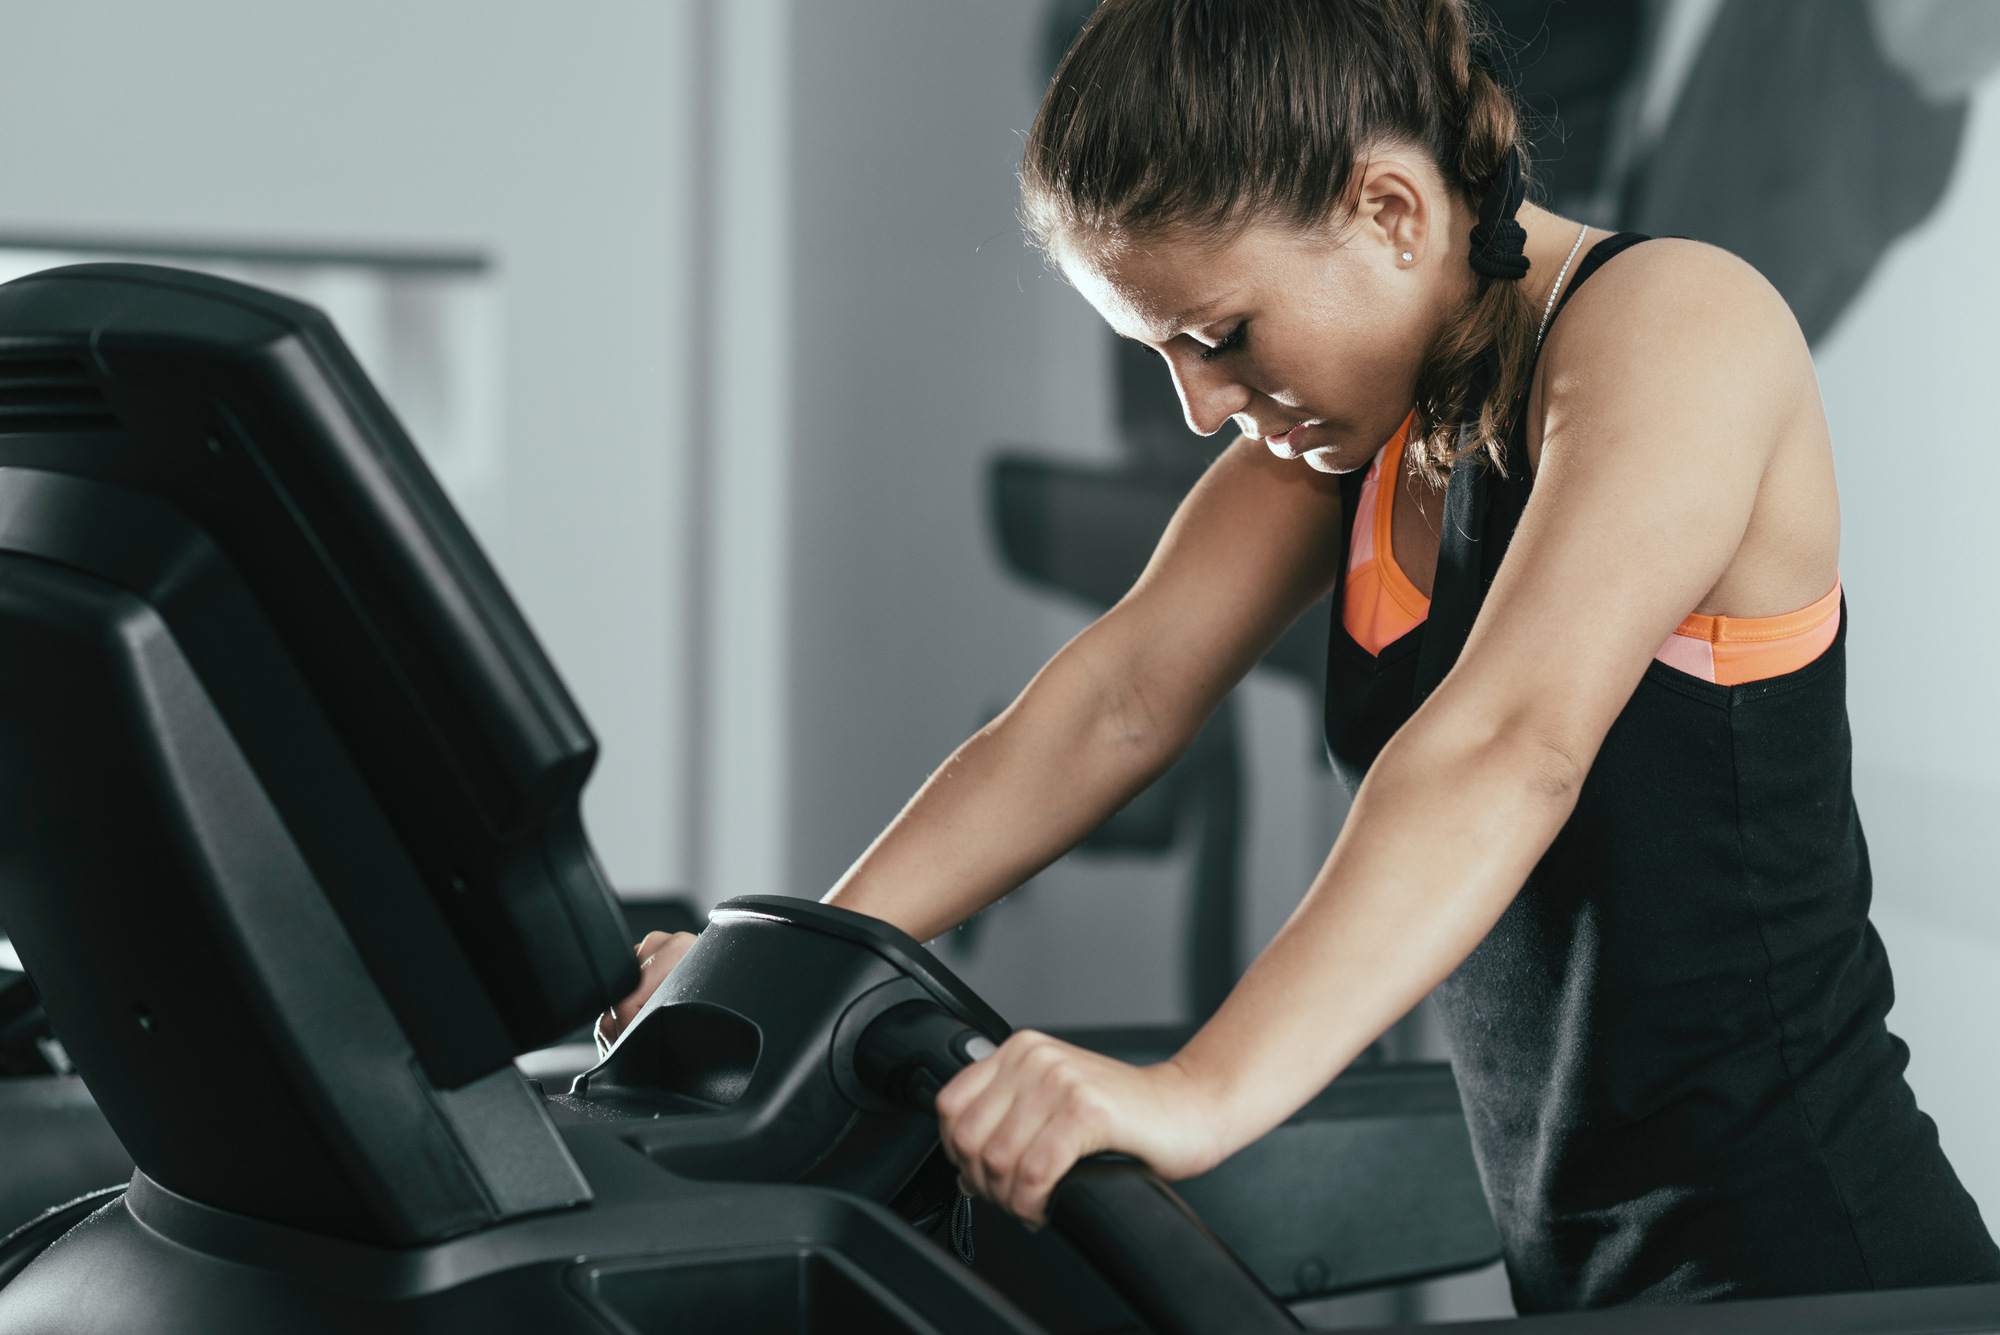 Treadmills For Sale Personally Can Save Tons of Cash